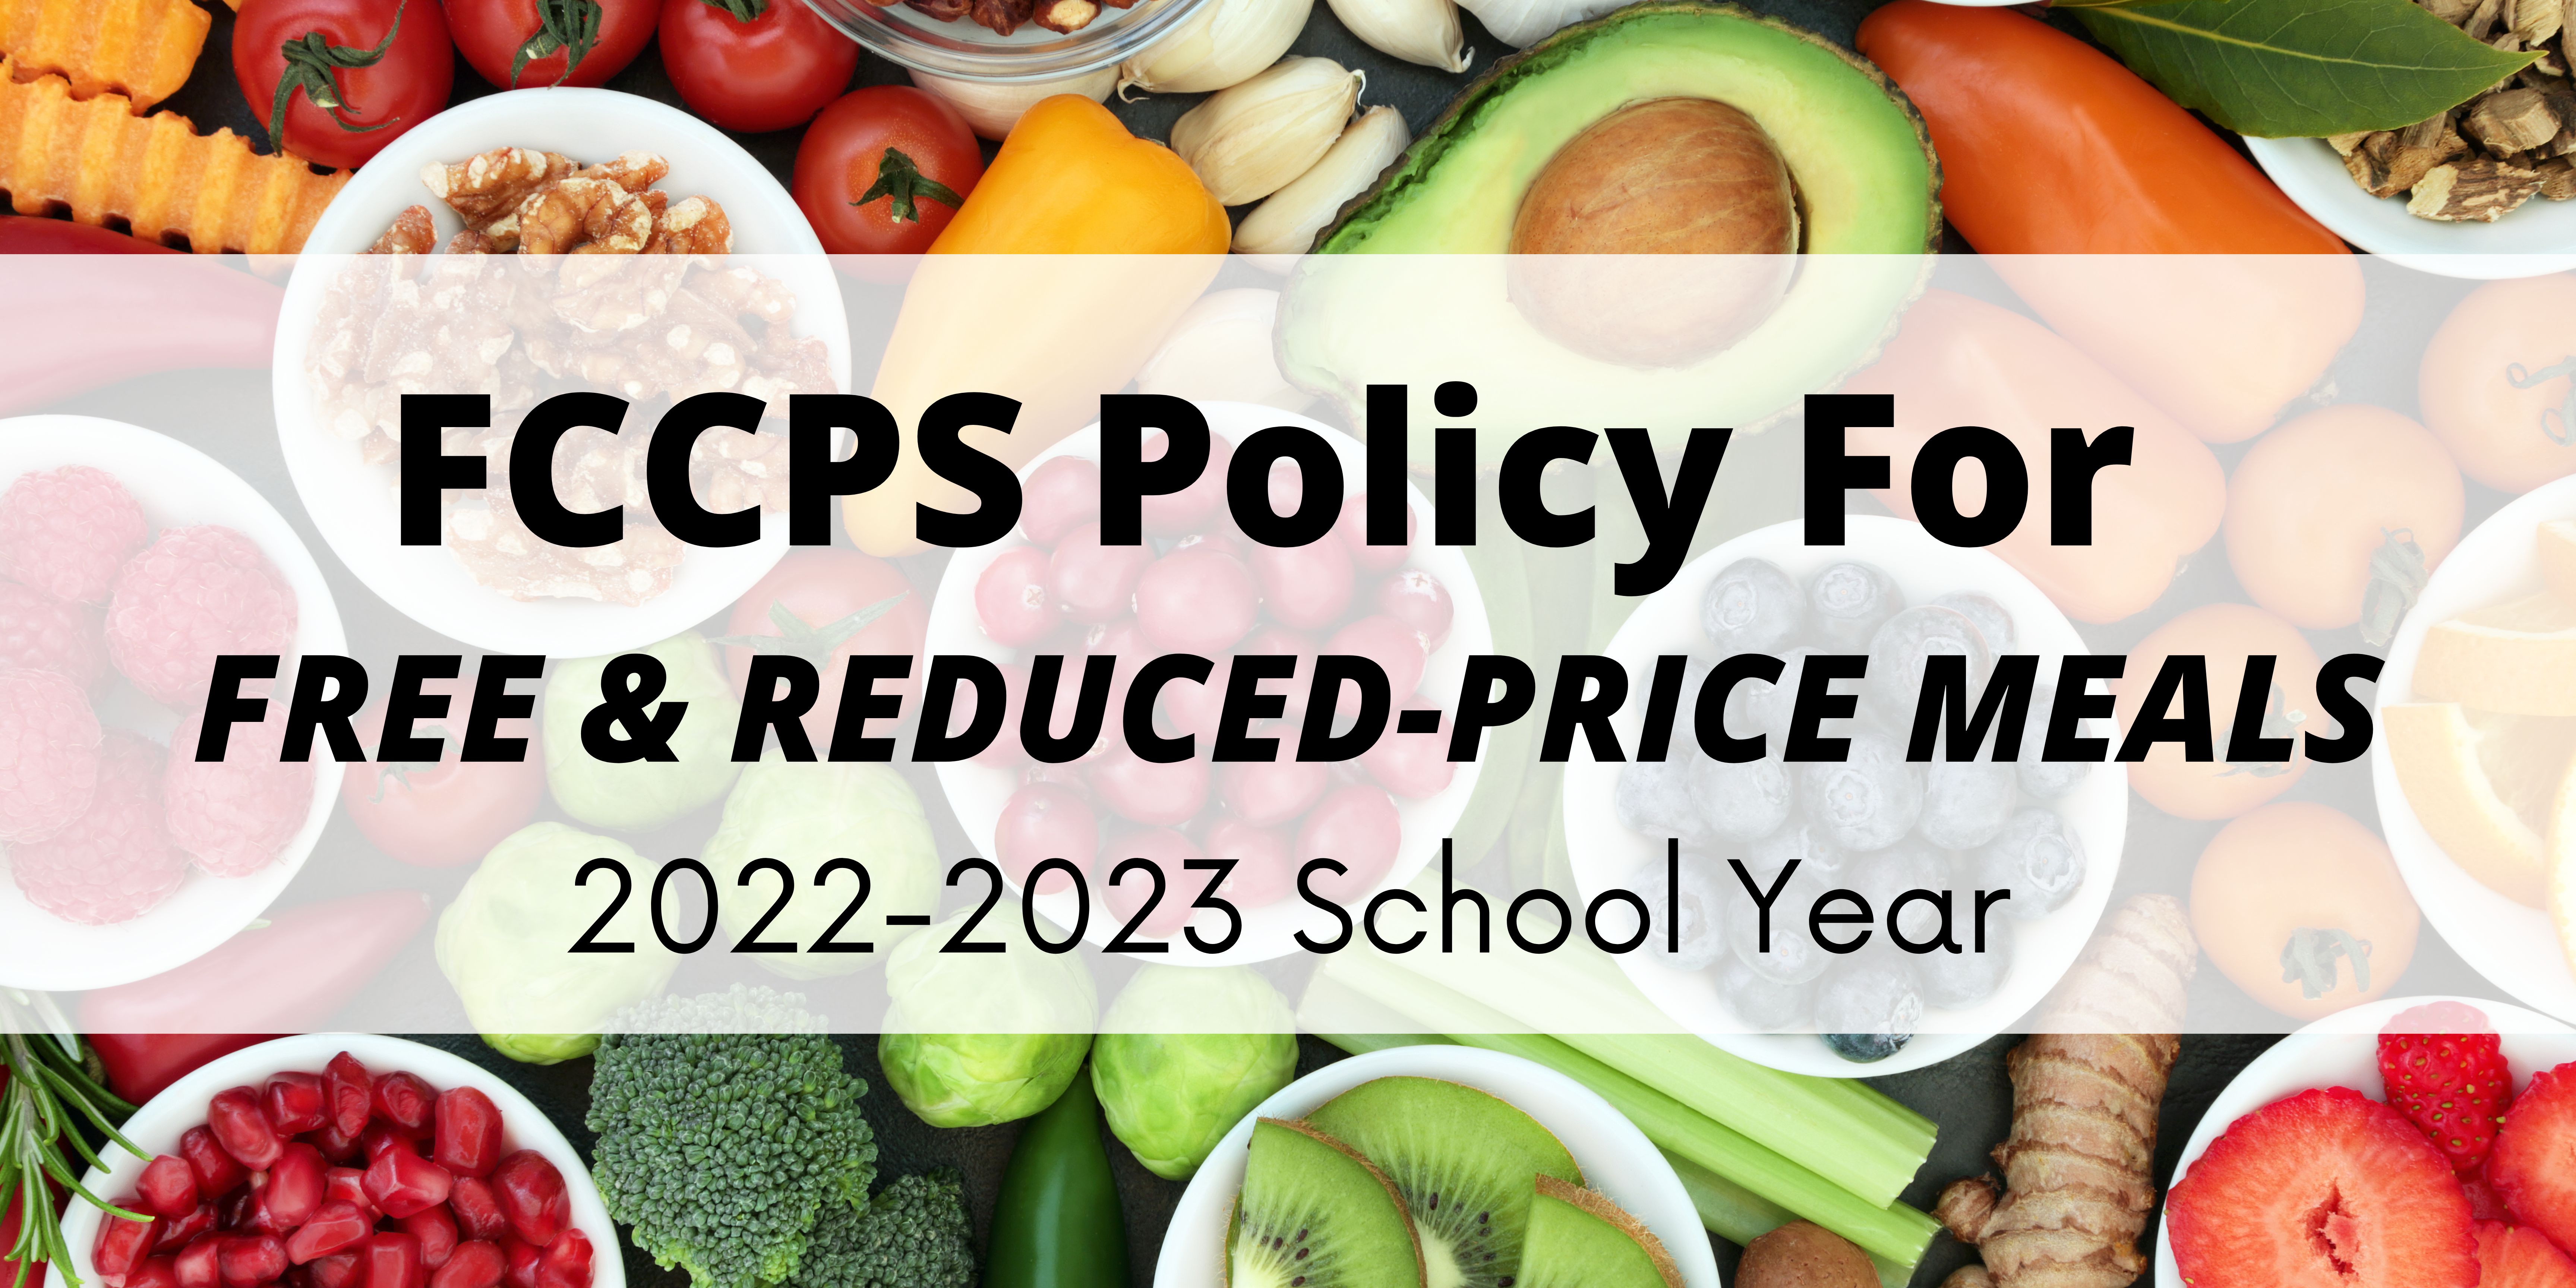 FCCPS Policy for Free/Reduced-Price Meals for the 2022-23 School year